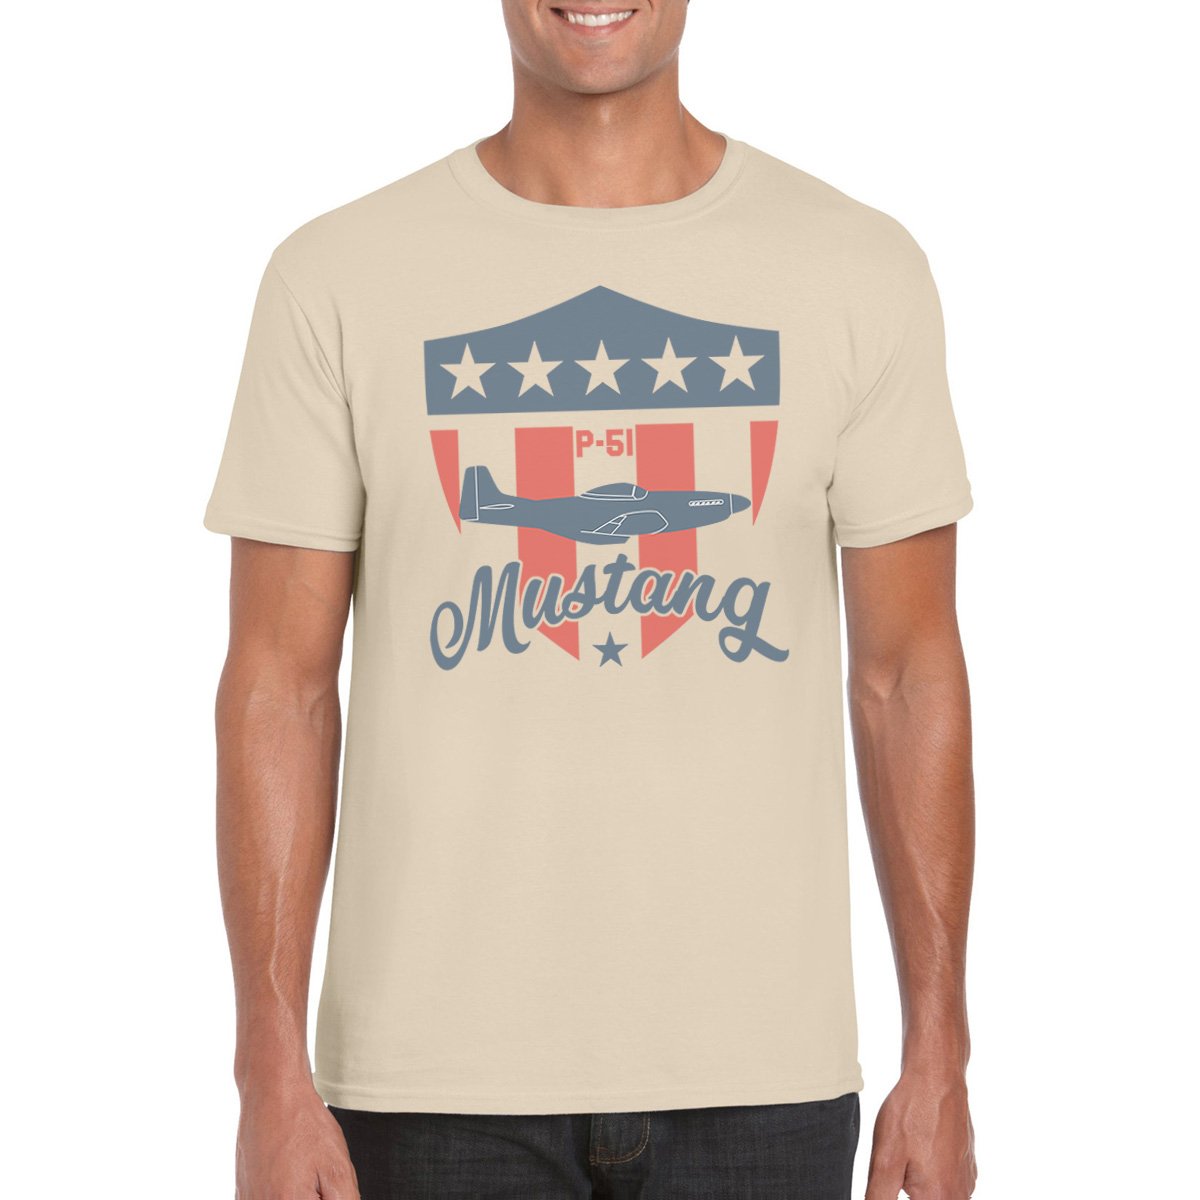 SHIELD P51 MUSTANG Semi-Fitted Unisex T-Shirt